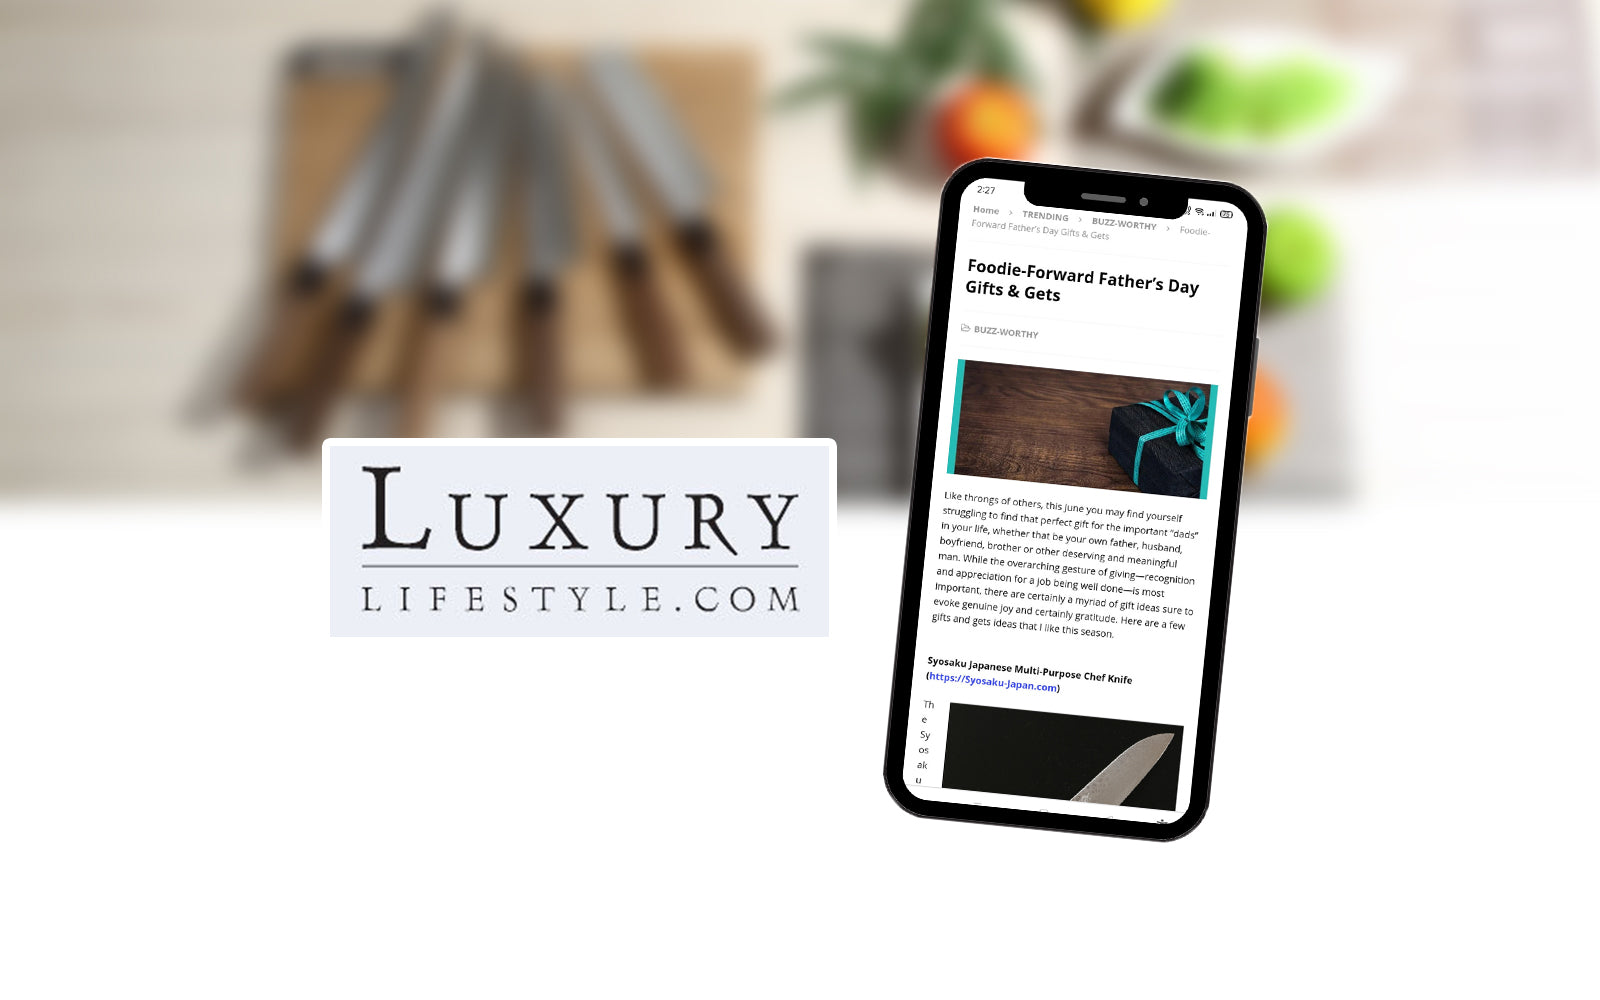 Featured in Luxury Lifestyle